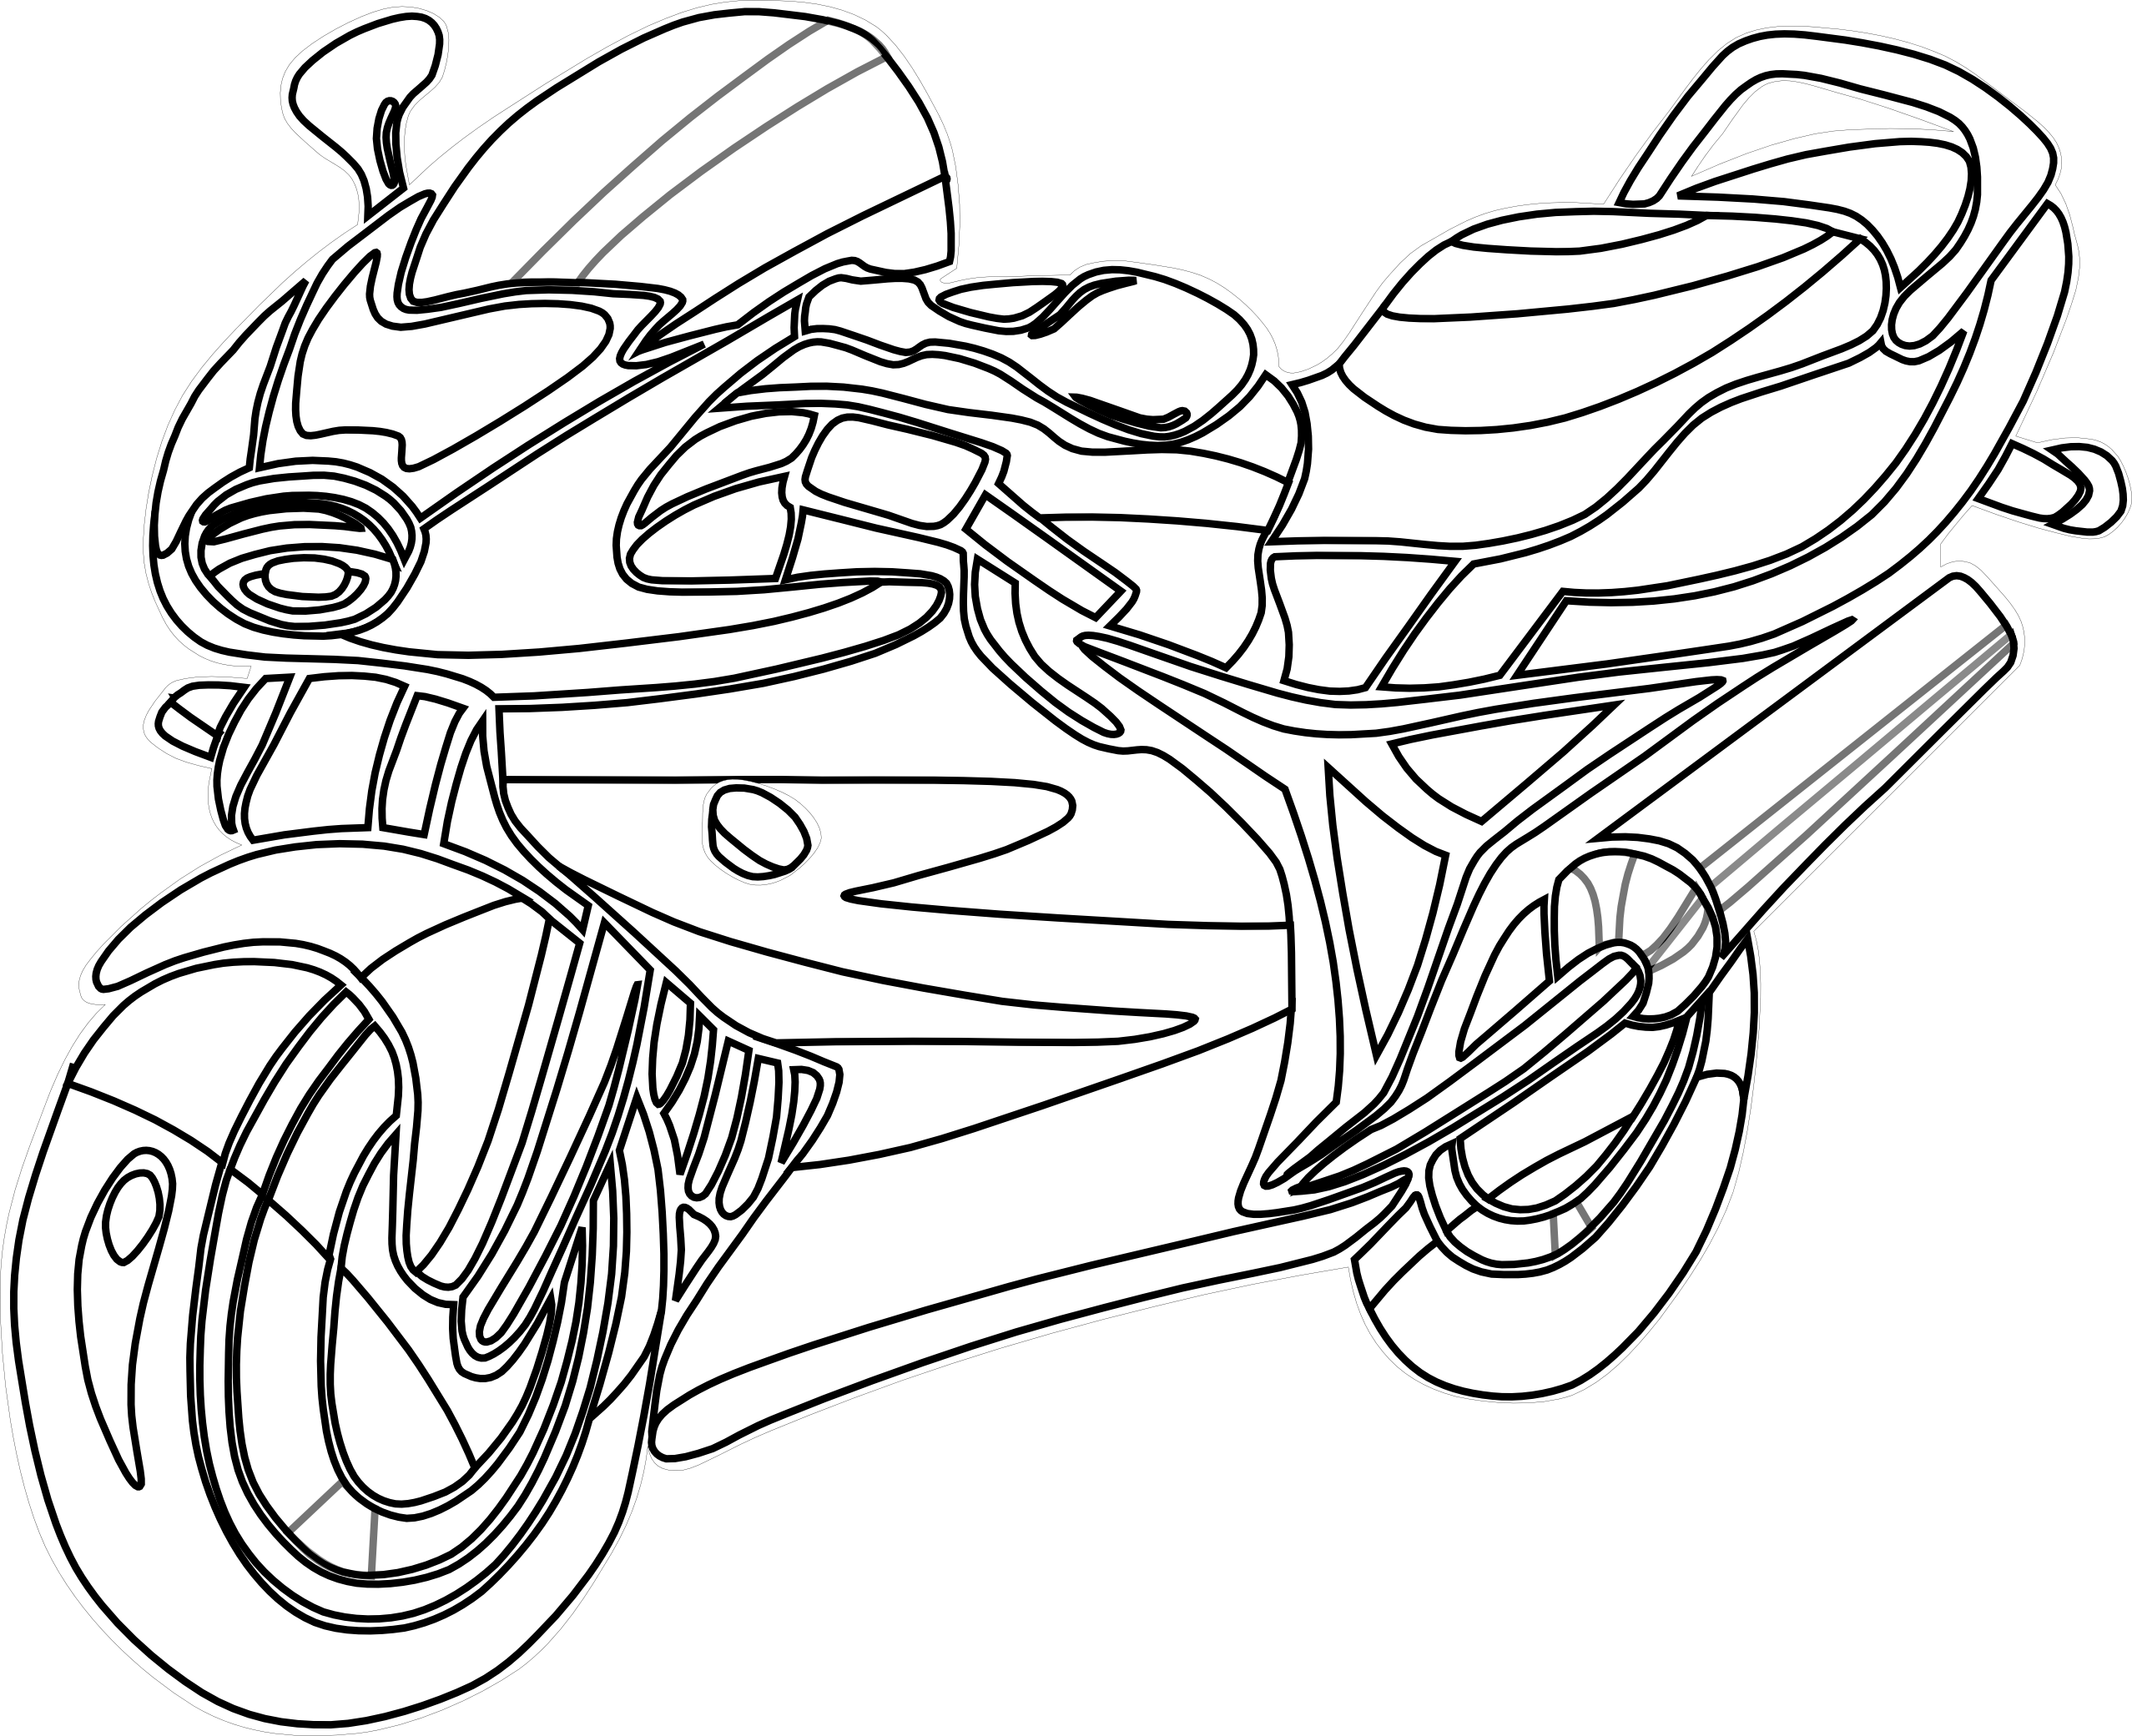 Motorcycle Vector Art - Clipart library